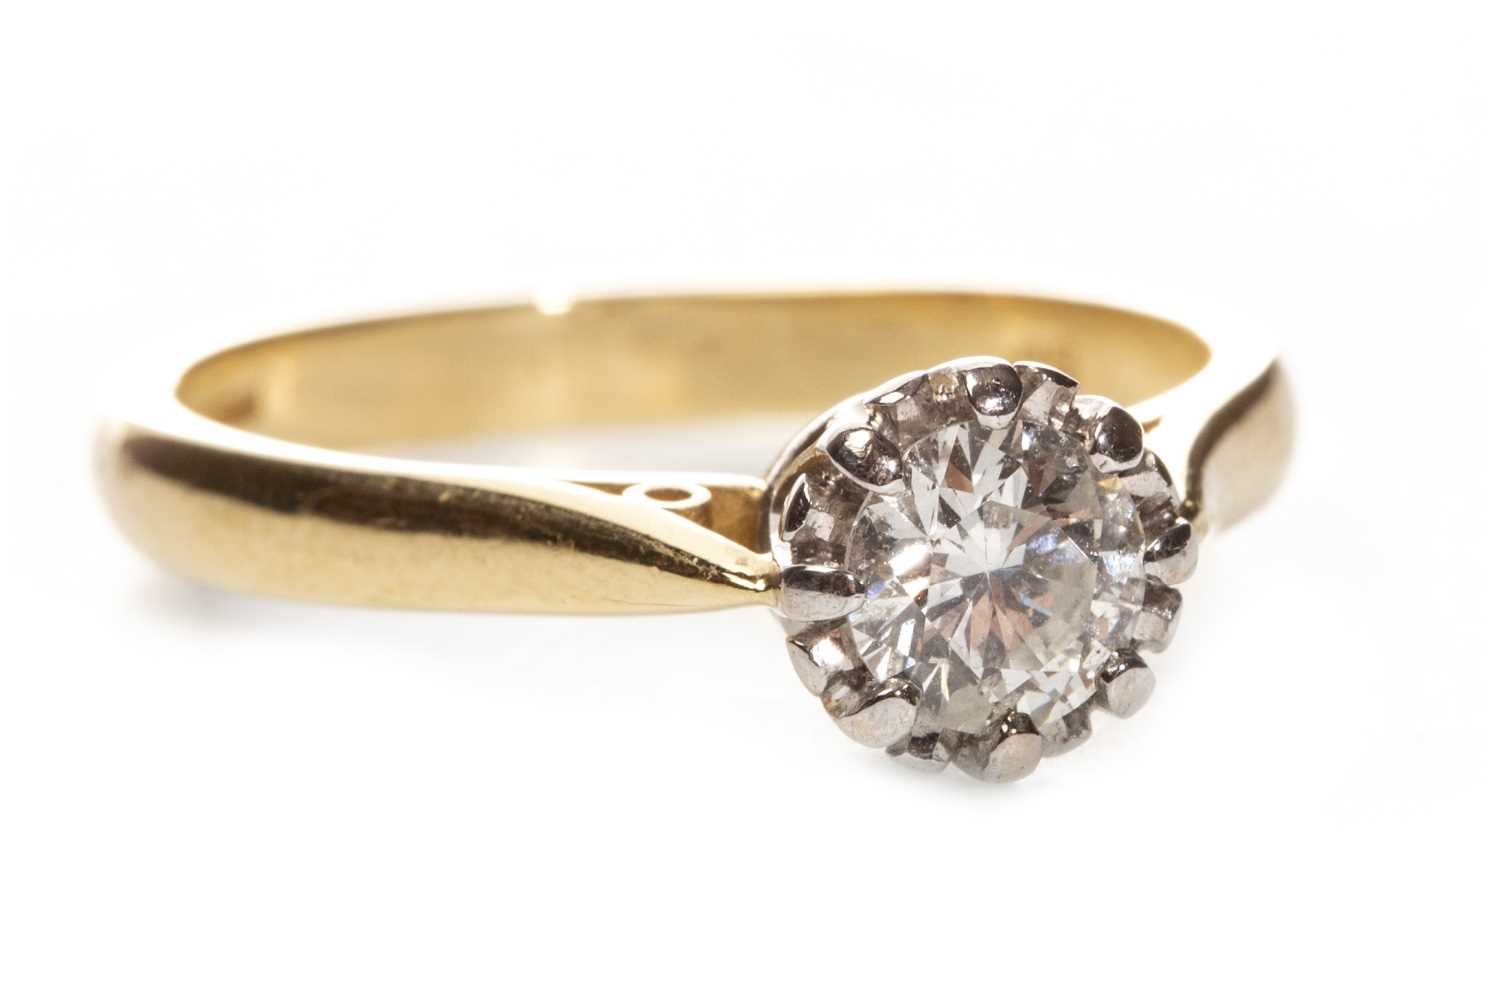 Lot 230 - A DIAMOND SOLITAIRE RING